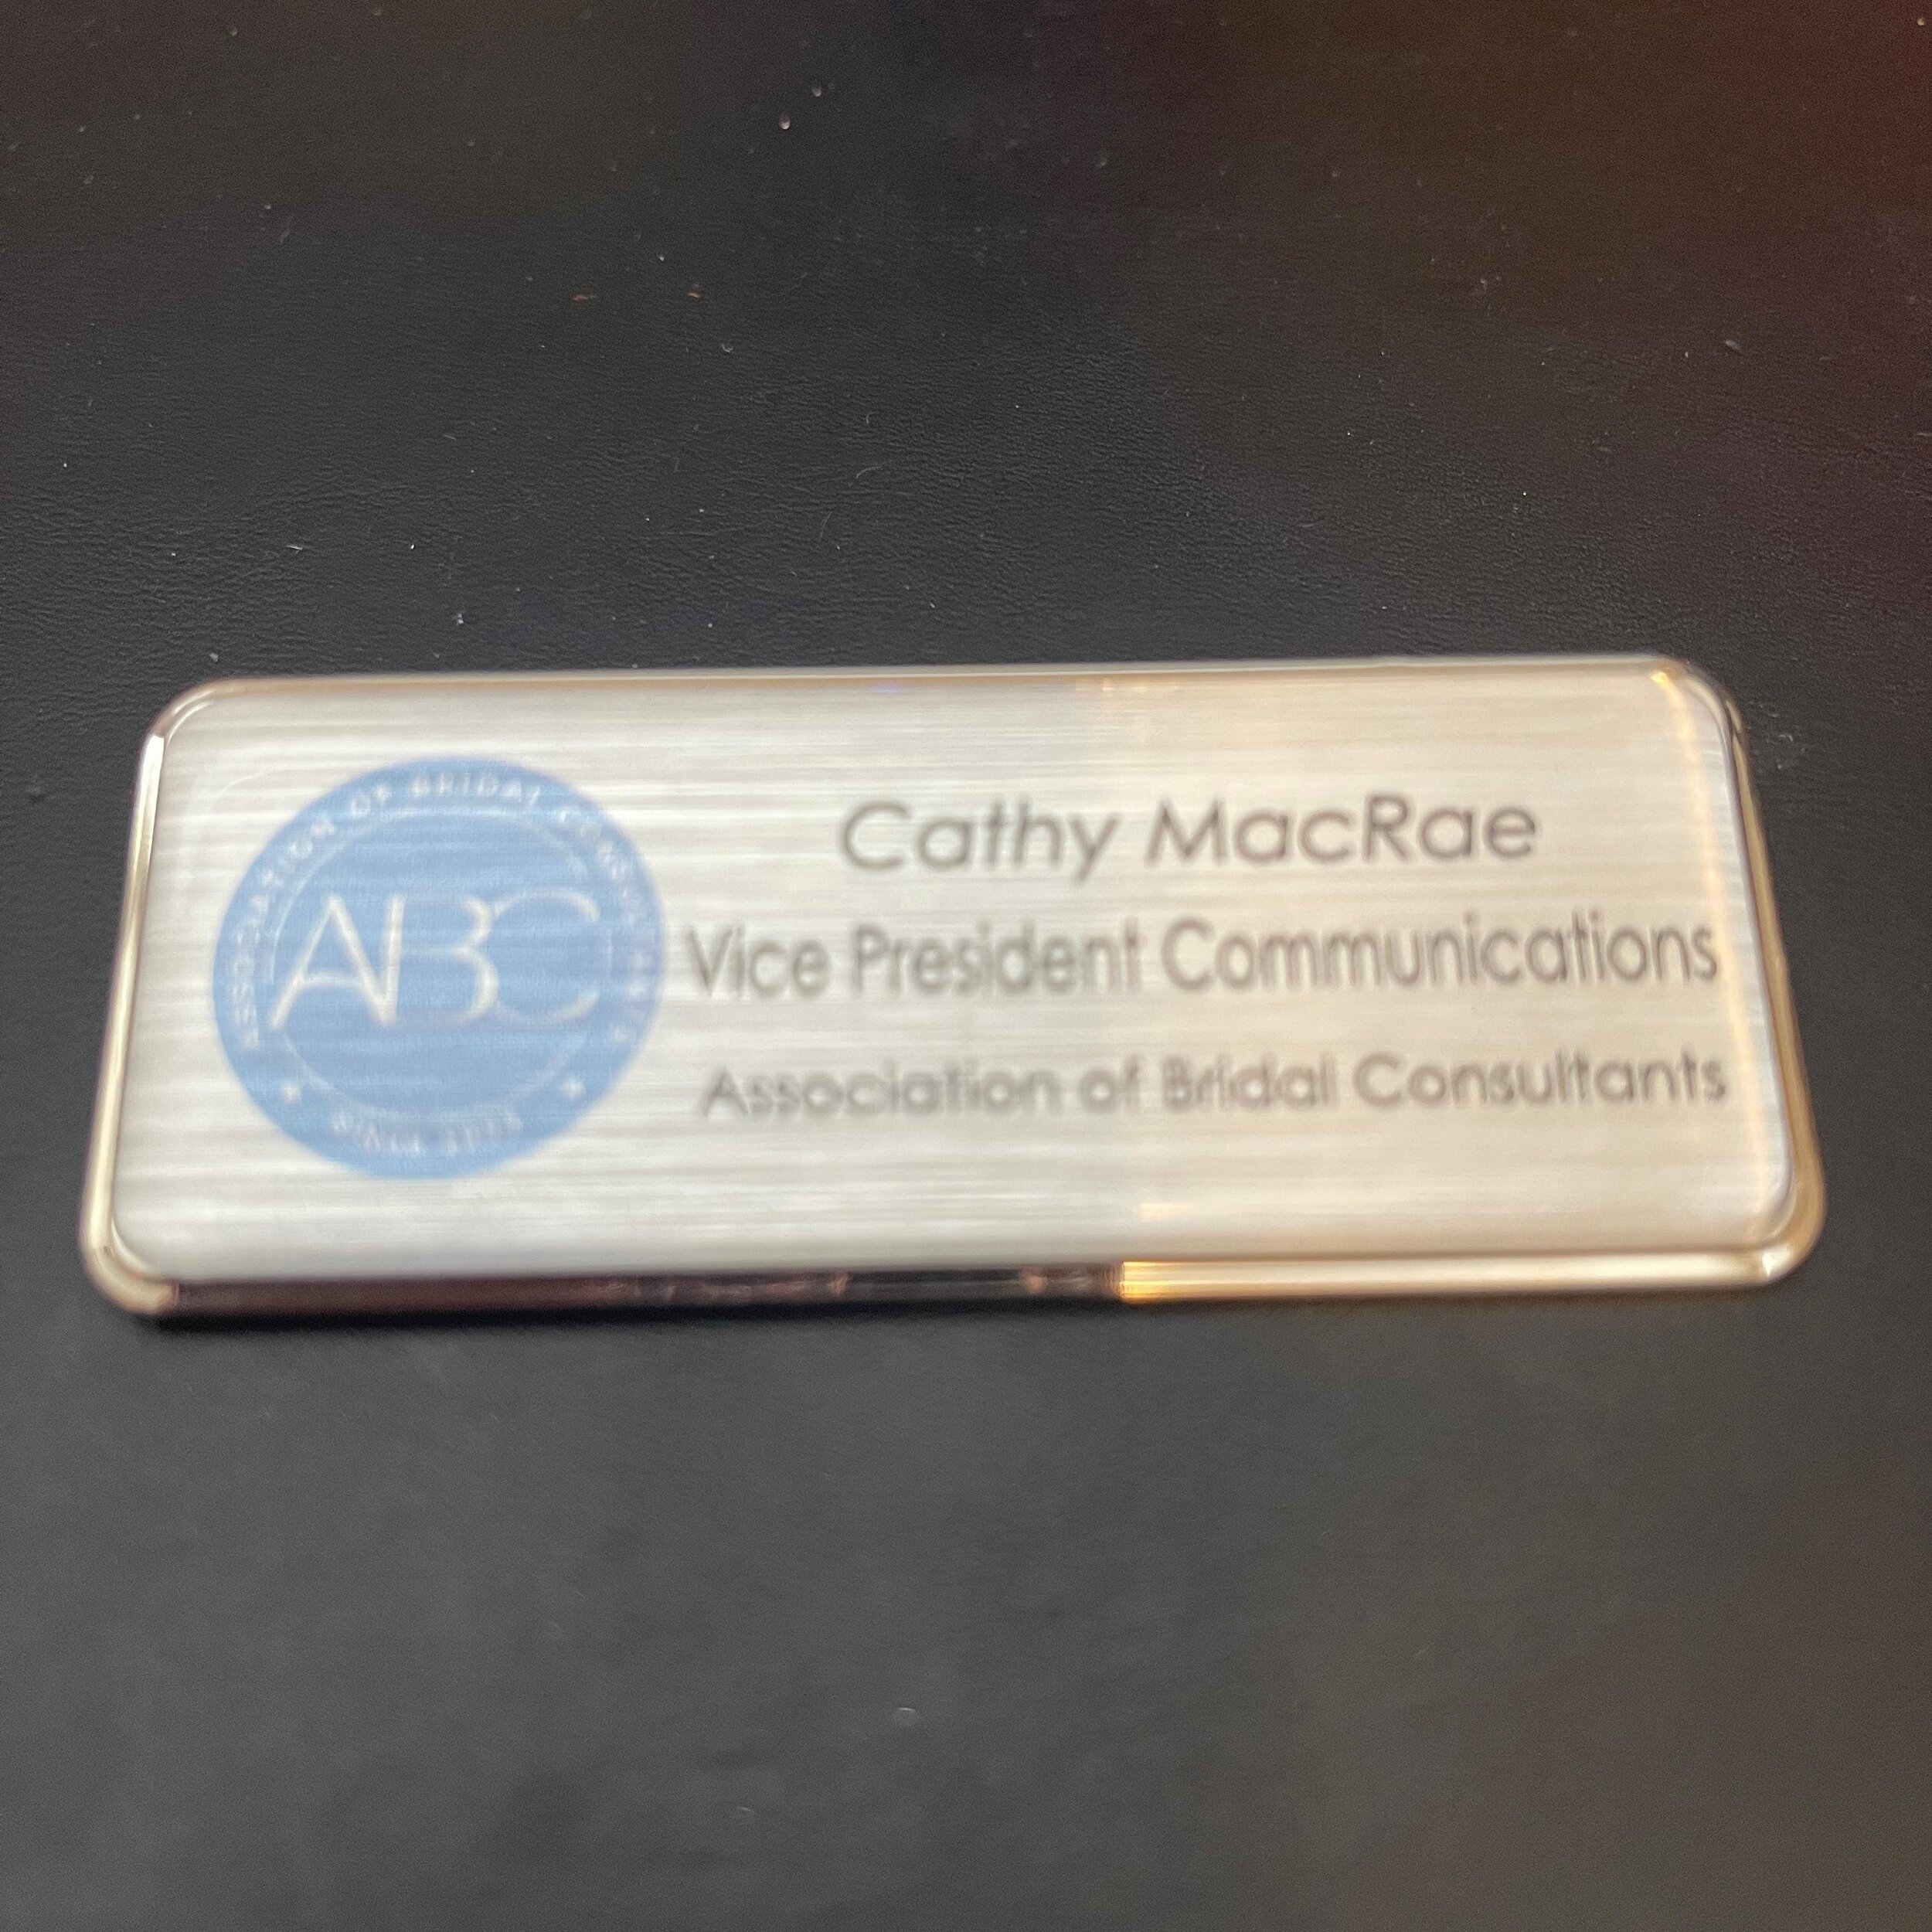 NEW ABC NAME BADGES ON SALE!!!

You asked and they&rsquo;re here just in time for wedding season! You can get new @abcassoc name badges with the new logo. A silver based name badge with a white background. Please note the character limits for both yo